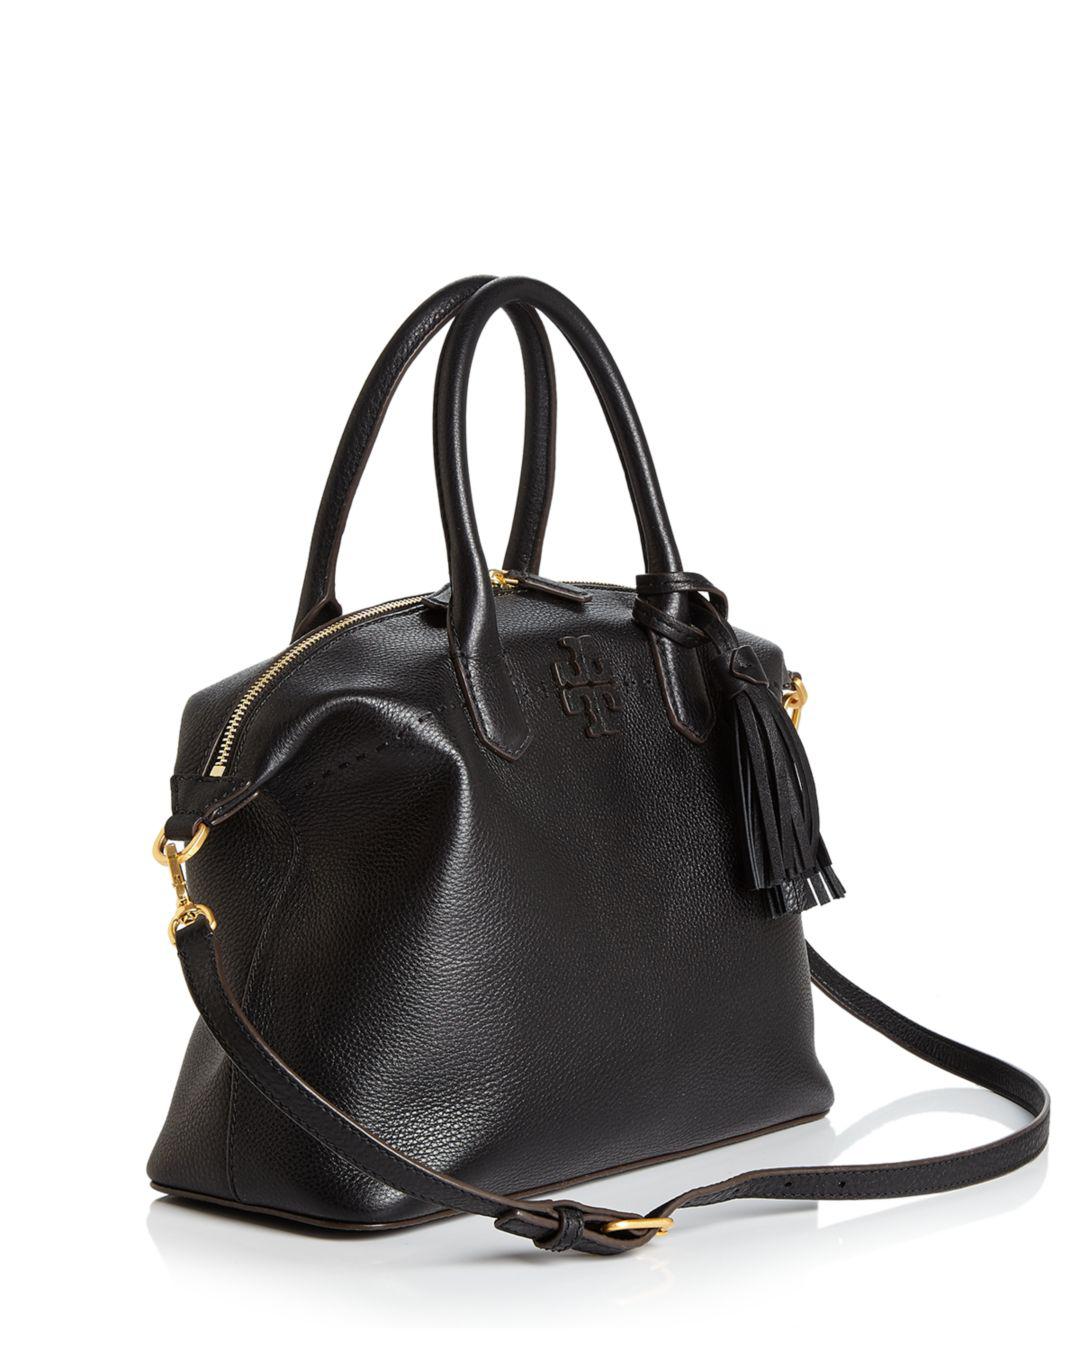 Tory Burch Mcgraw Slouchy Leather Satchel in Black/Gold (Black) - Lyst